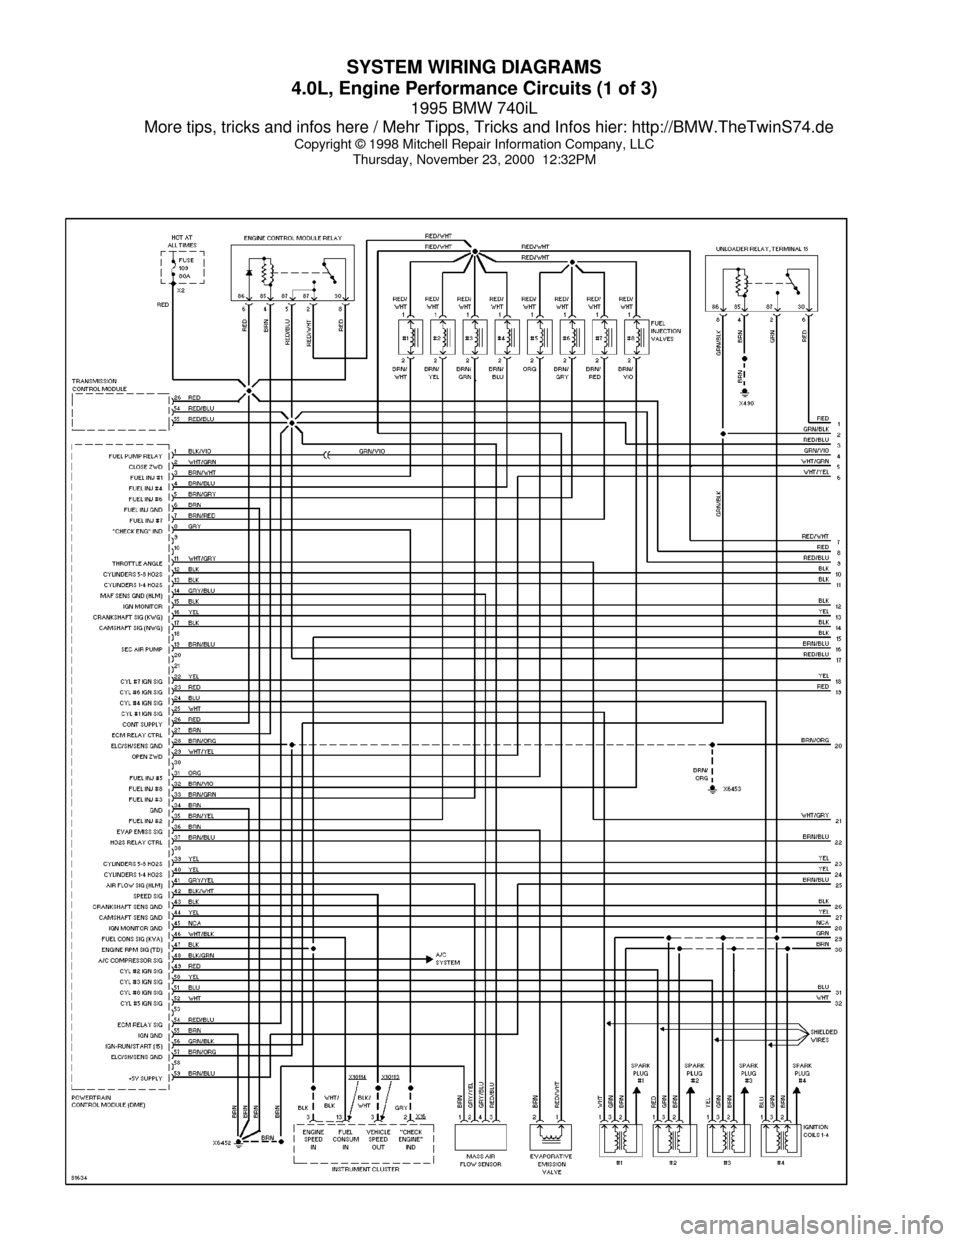 BMW 740il 1995 E38 System Wiring Diagrams SYSTEM WIRING DIAGRAMS
4.0L, Engine Performance Circuits (1 of 3) 1995 BMW 740iL
More tips, tricks and infos here / Mehr Tipps, Tricks and Infos hier: ht\
tp://BMW.TheTwinS74.de Copyright © 1998 Mitc